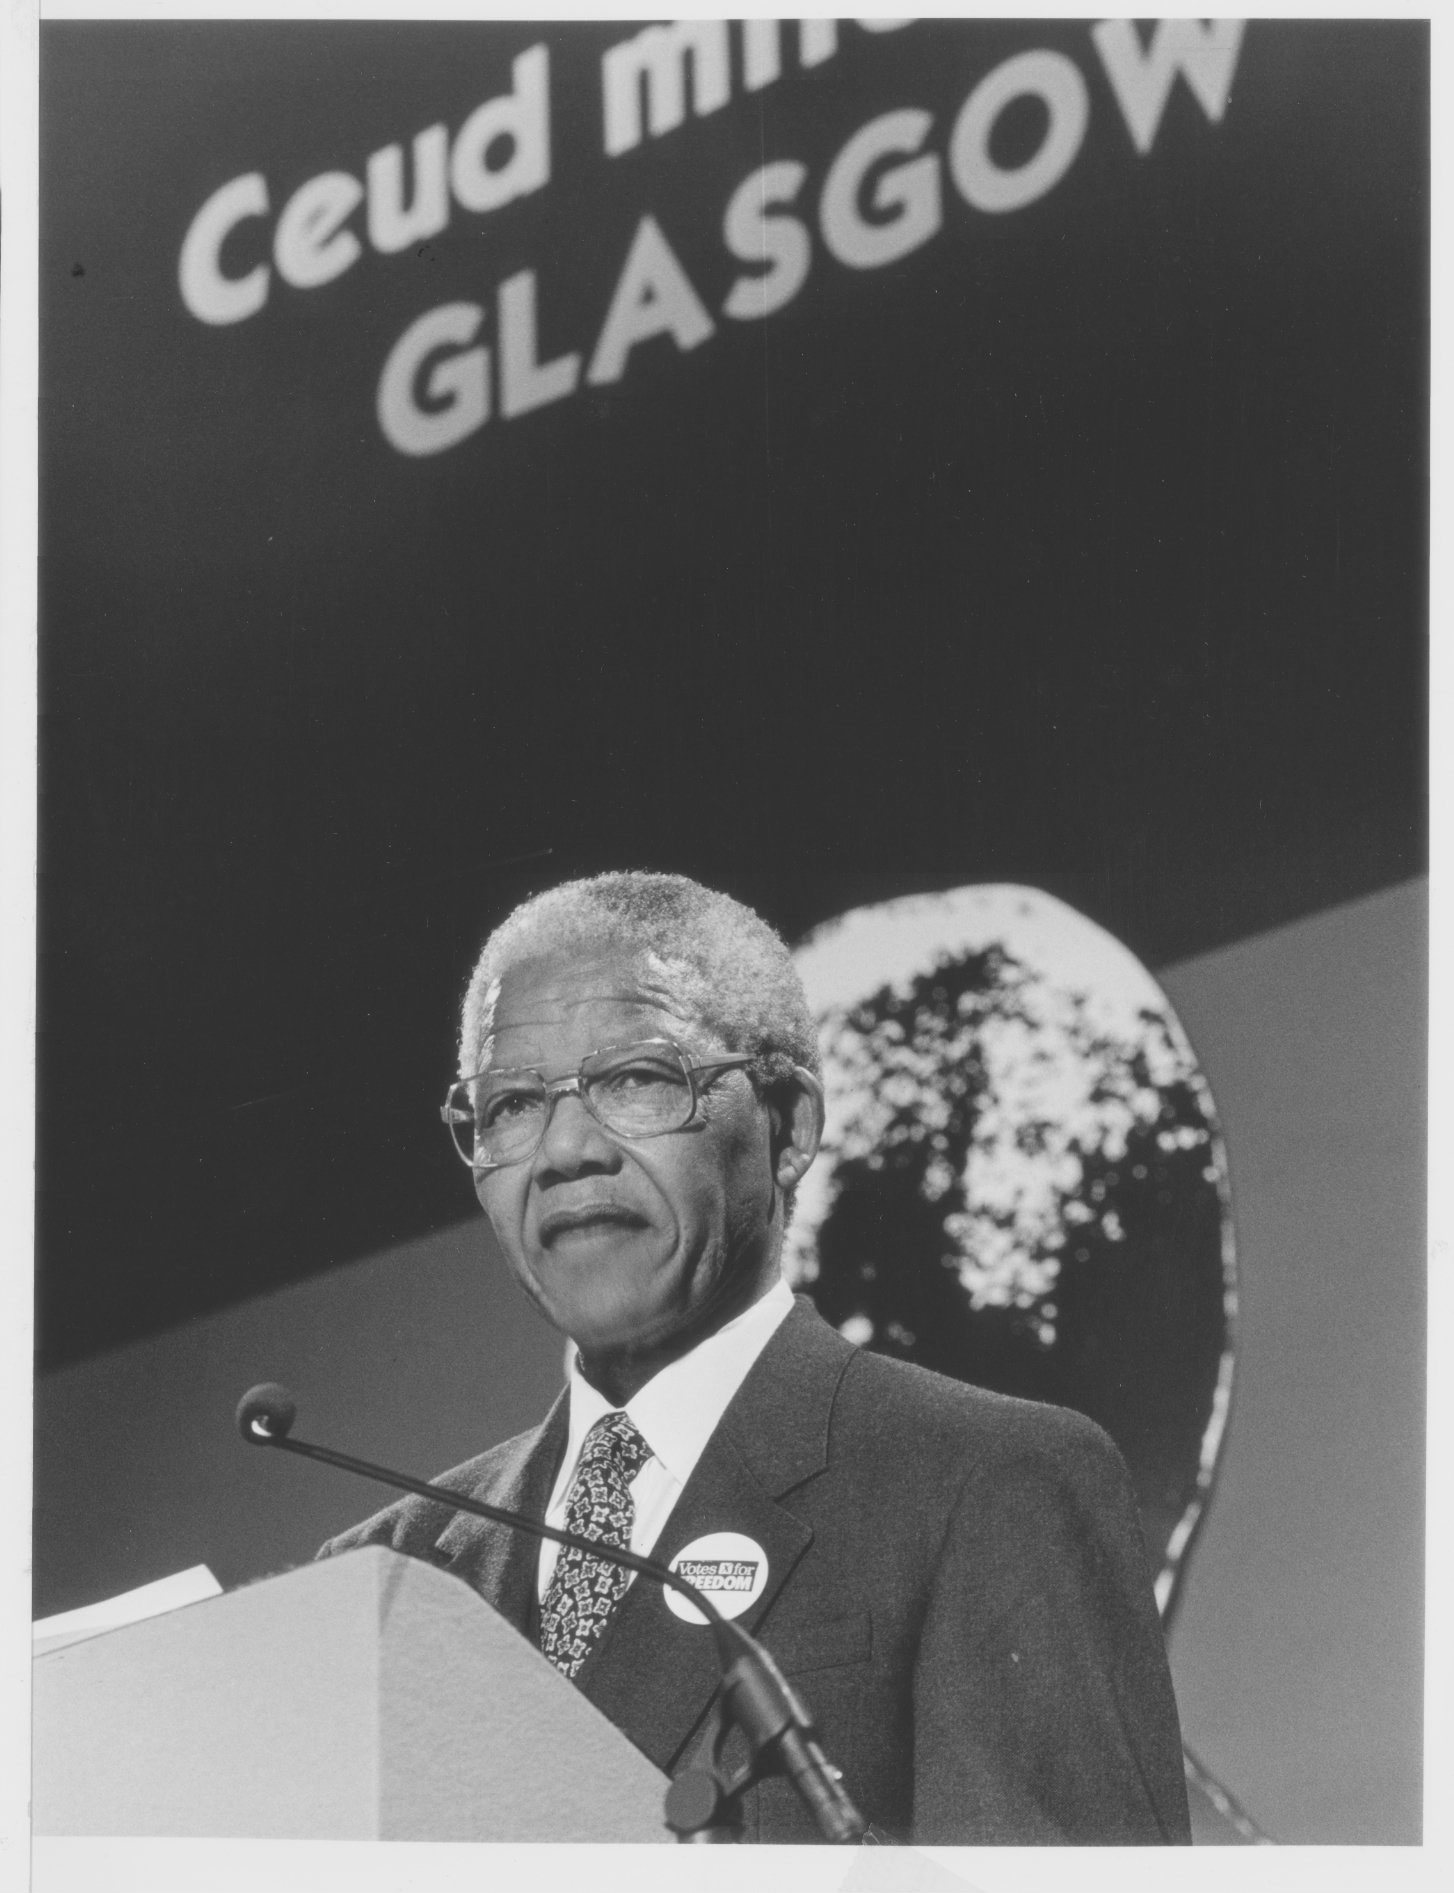 Former South African President Nelson Mandela giving a speech on stage during his visit to Glasgow in October 1993.